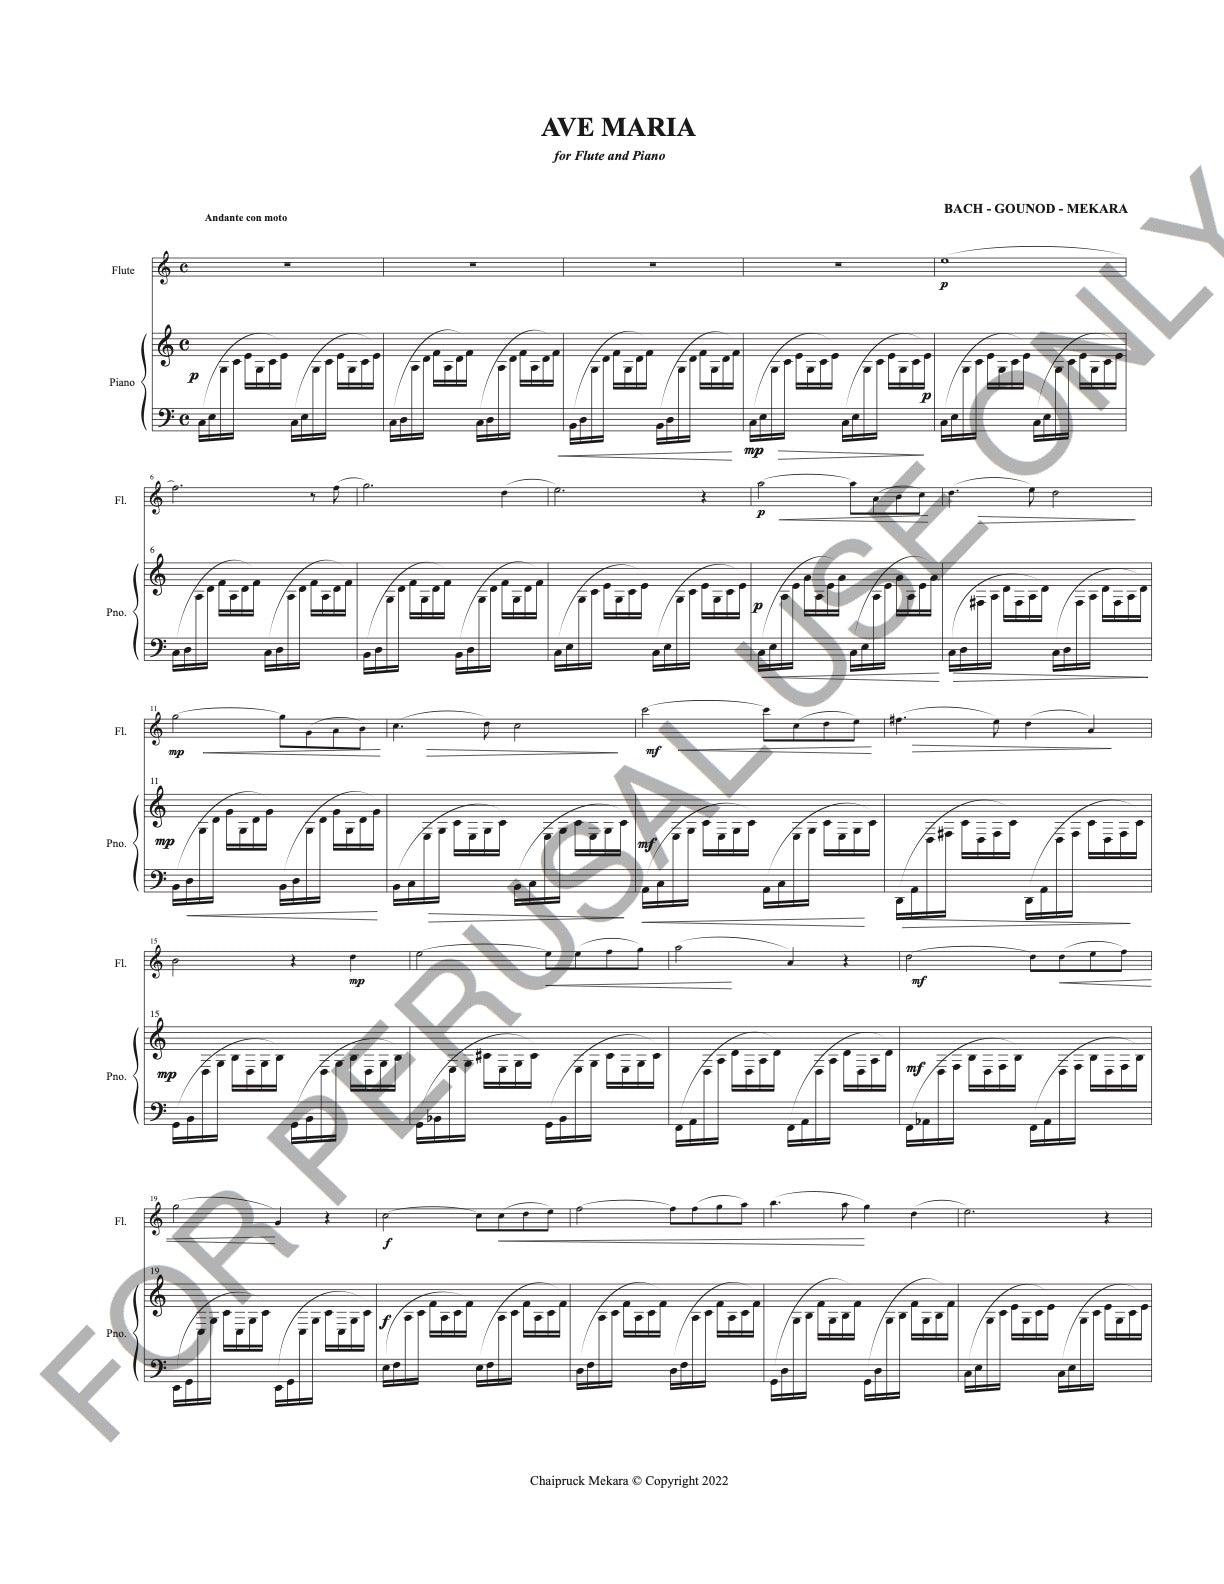 Ave Maria by J.S. Bach and Gounod for Flute and Piano Duet sheet music - ChaipruckMekara